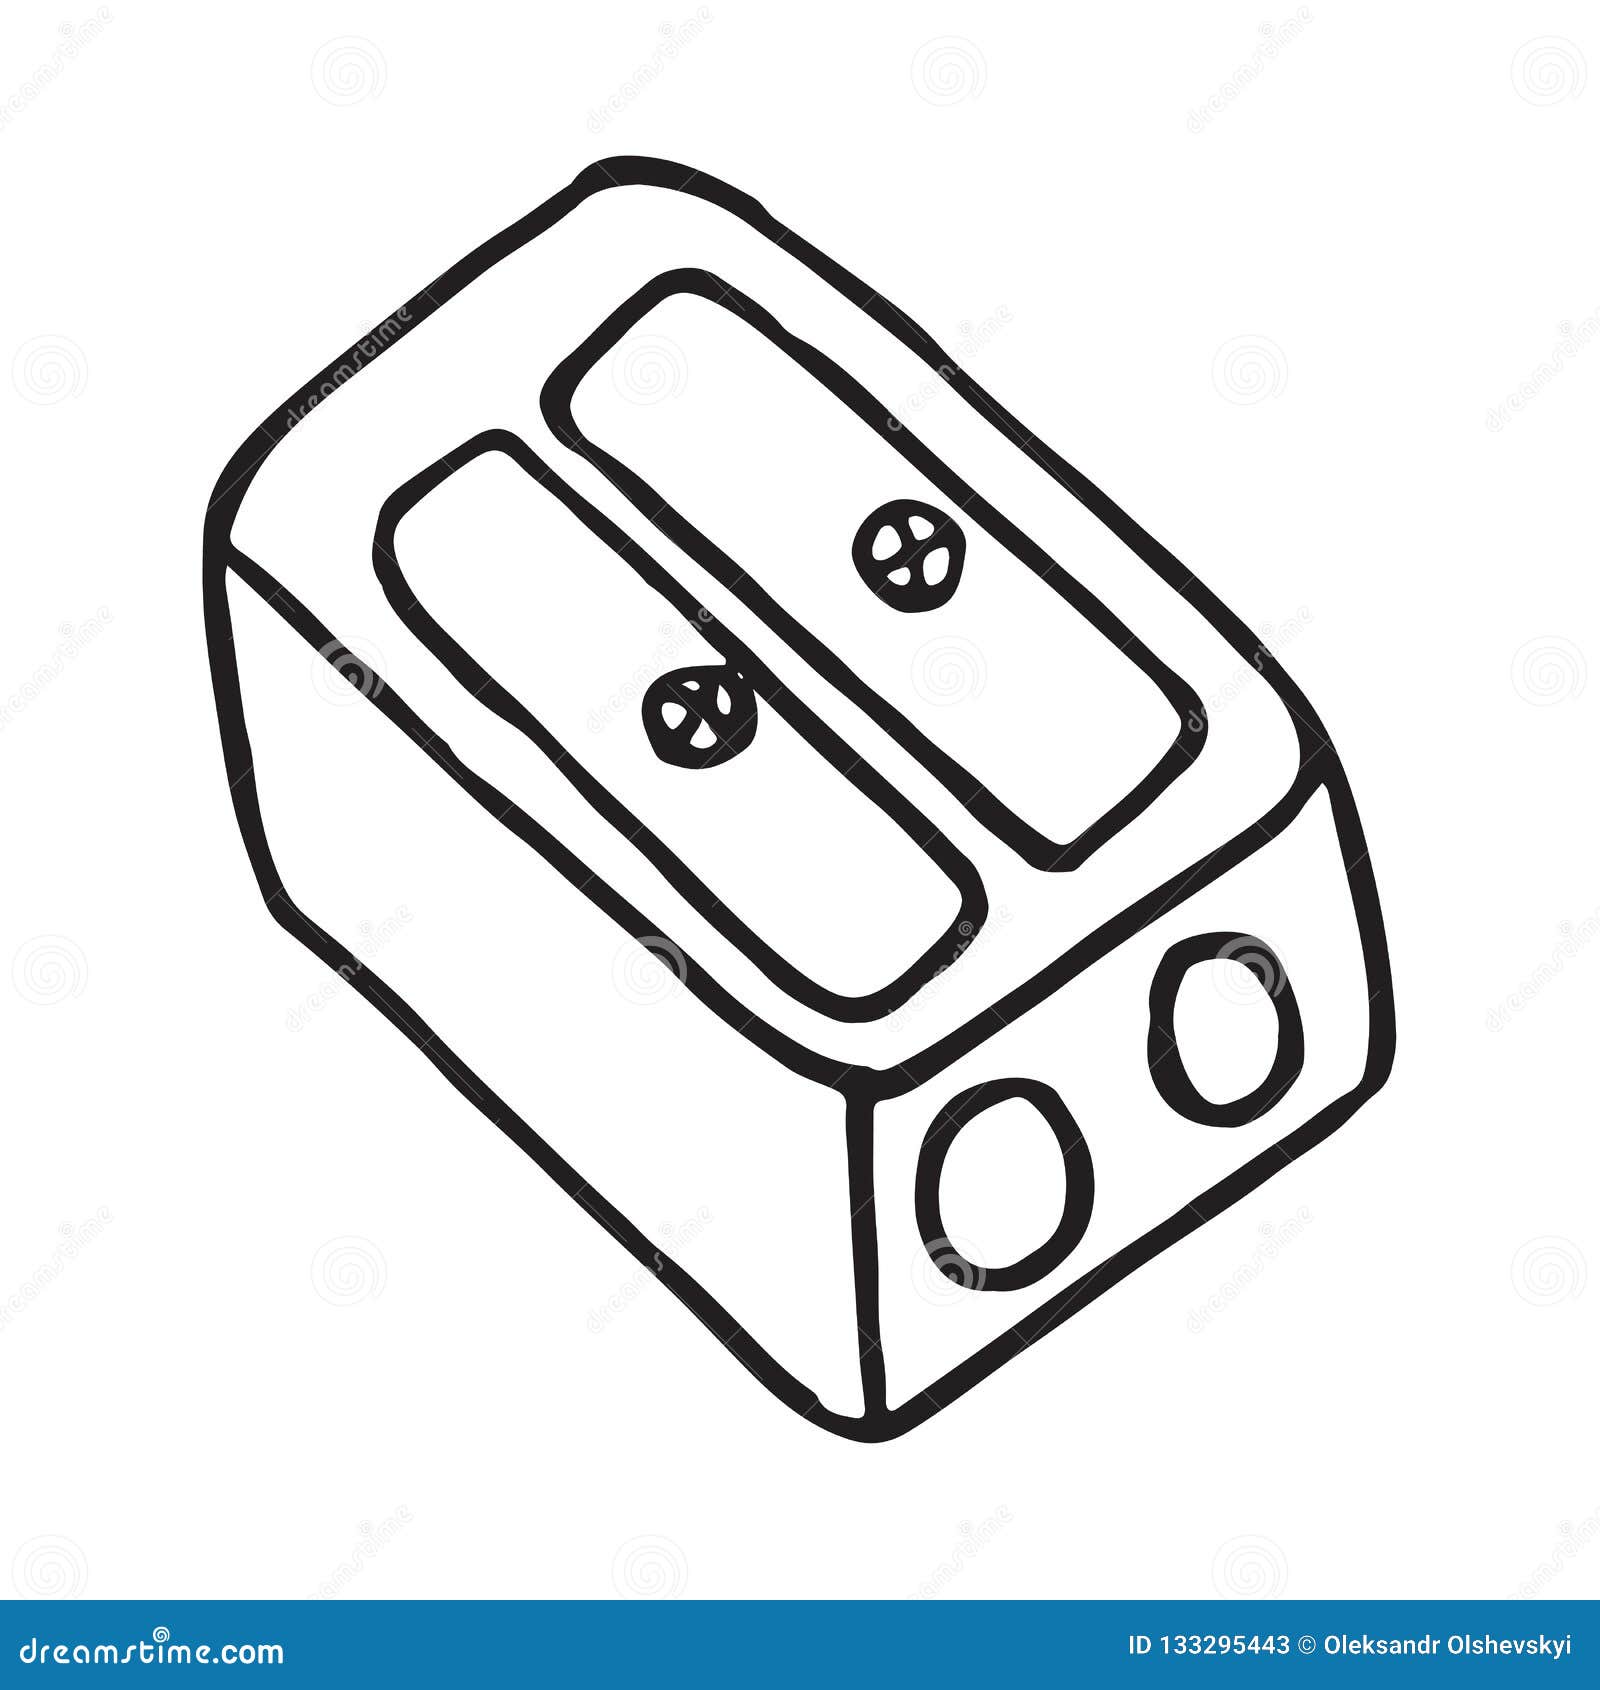 Hand Drawn Pencil Sharpener Doodle Icon Stock Vector Illustration of